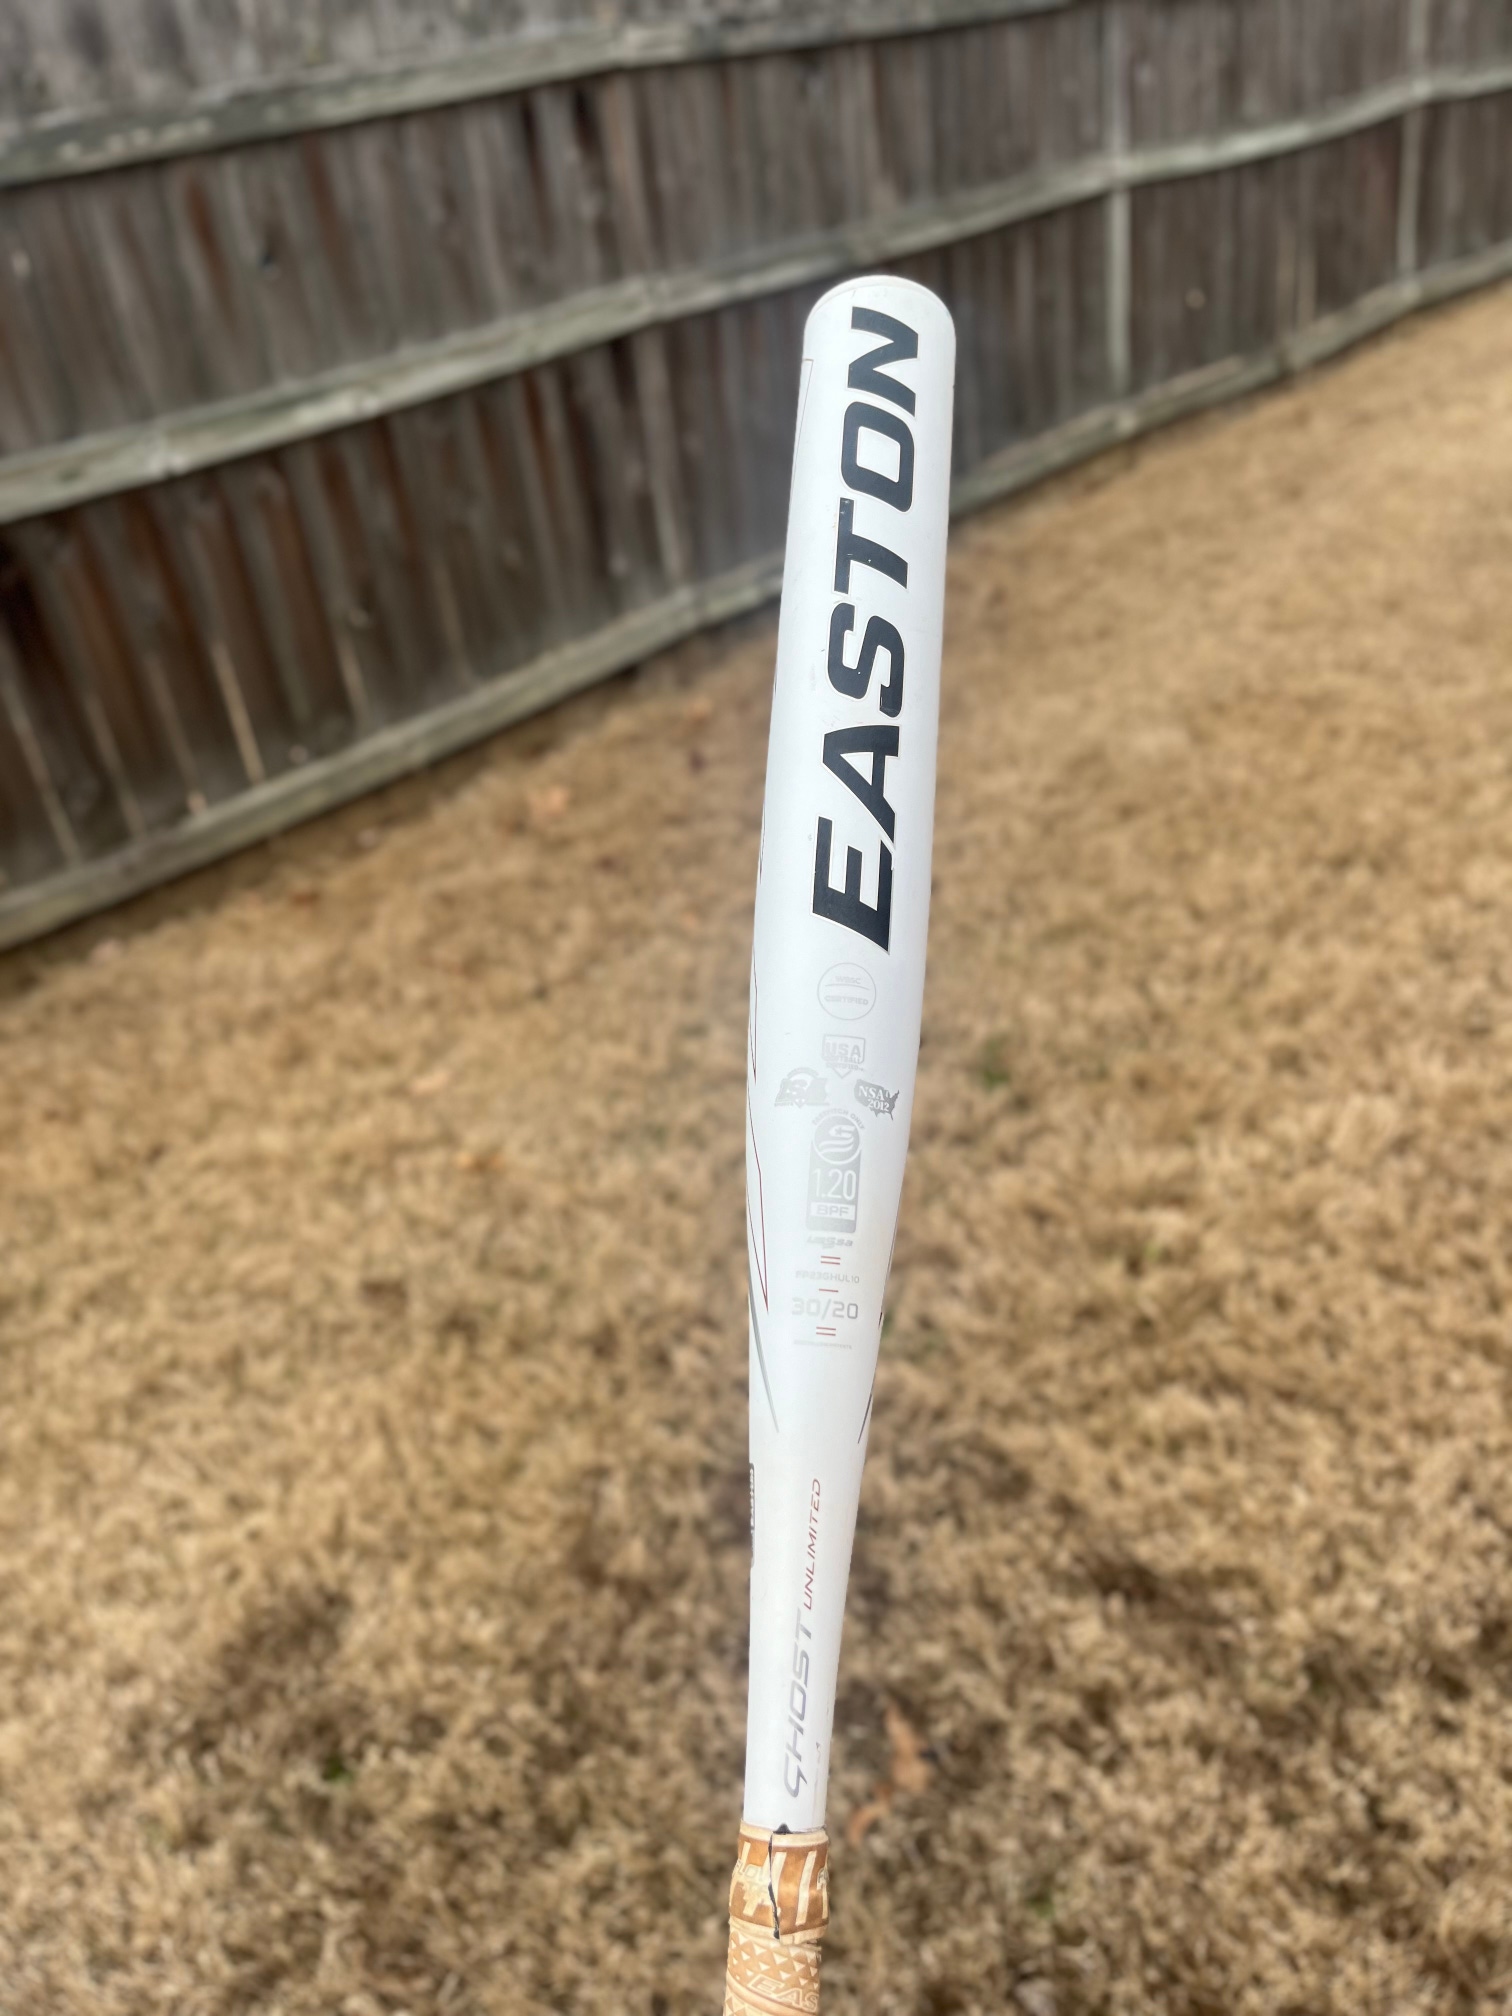 Barely Used Easton Ghost Bat 20 oz 30"